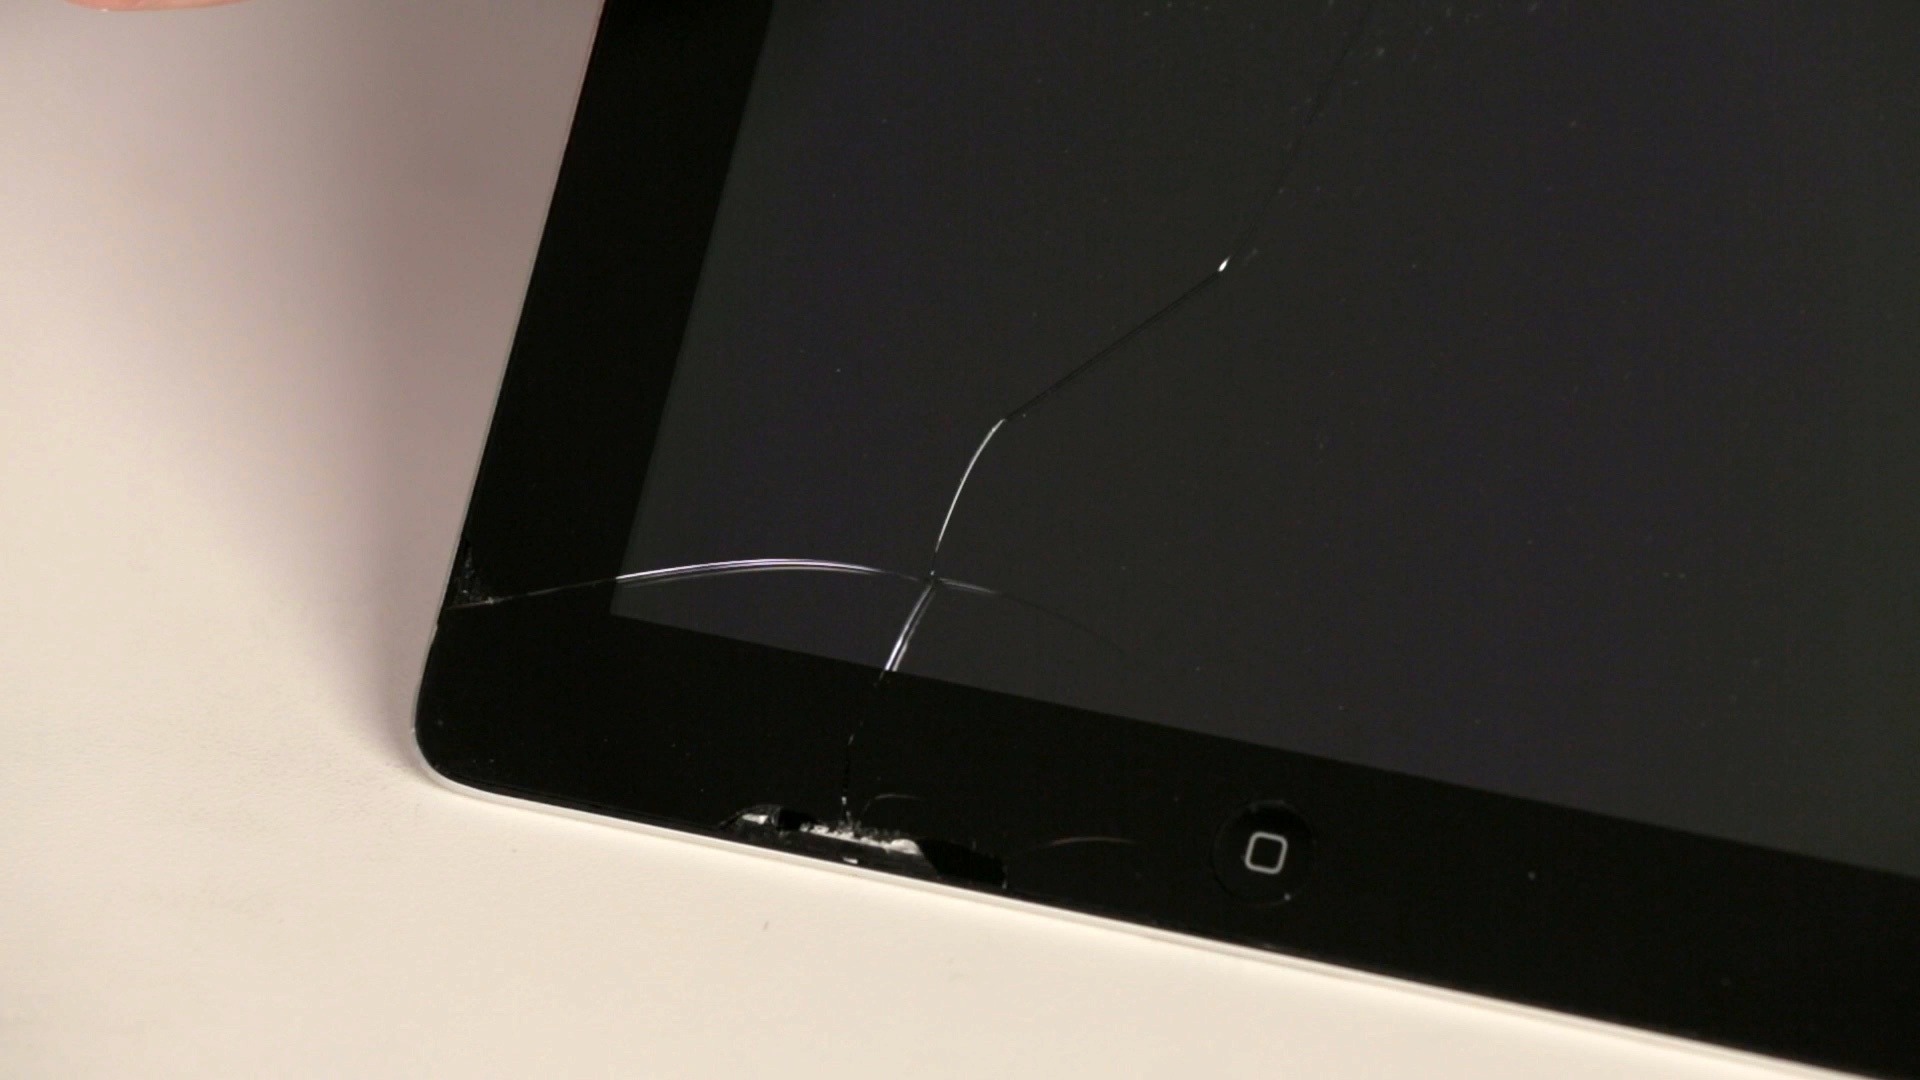 How To Fix A Cracked iPhone Or iPad Screen